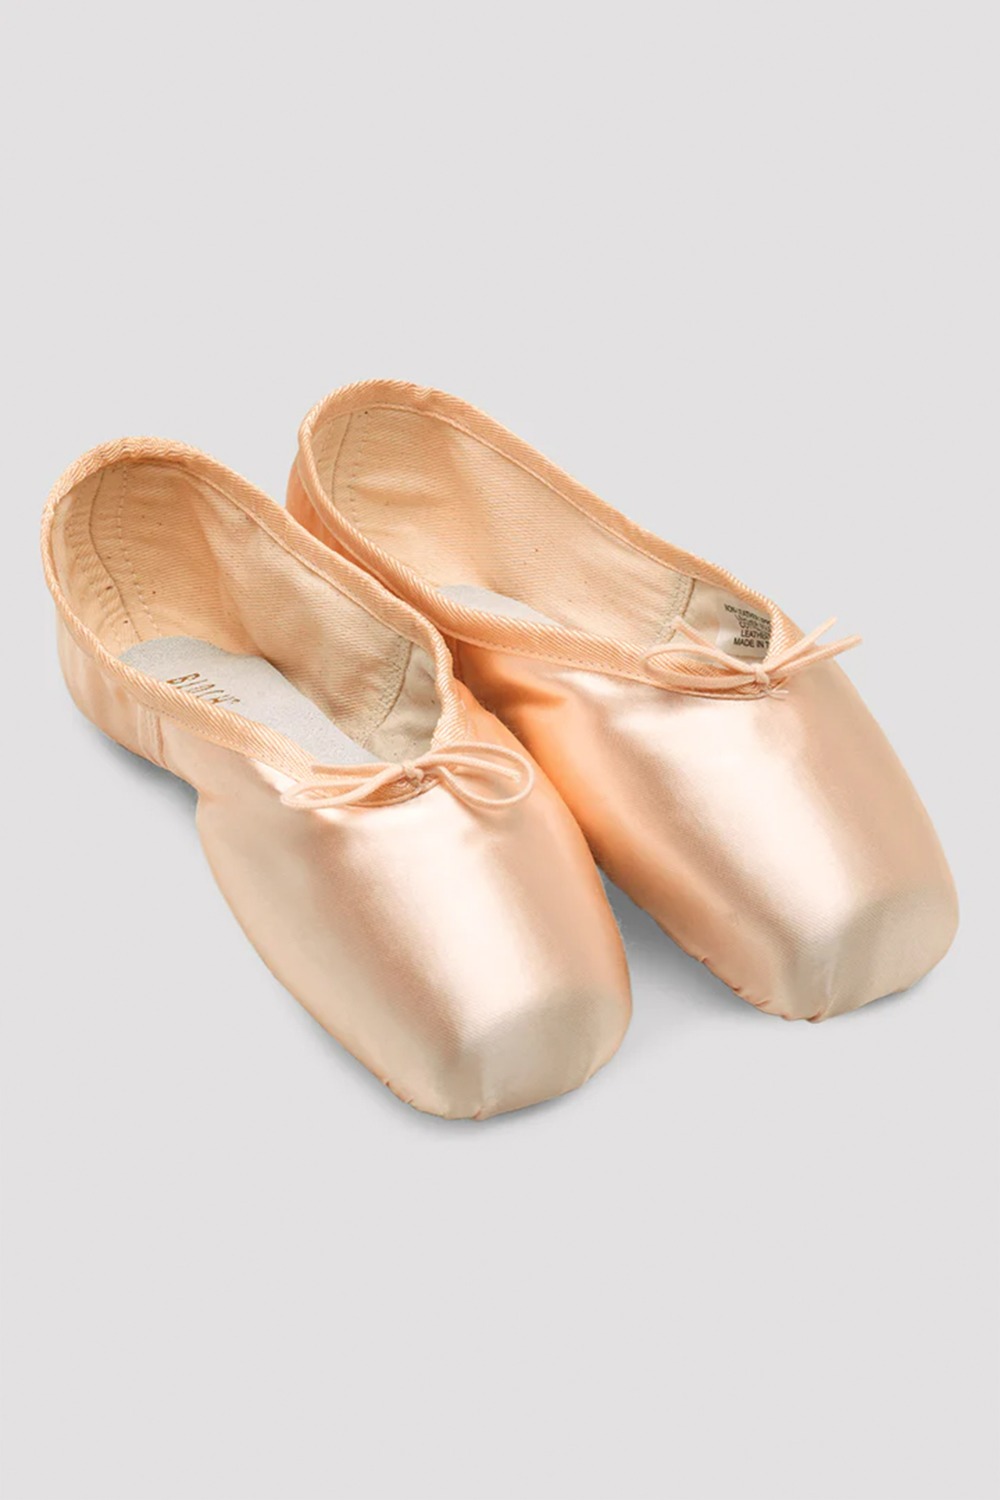 HERITAGE STRONG POINTE SHOES - NISARAT